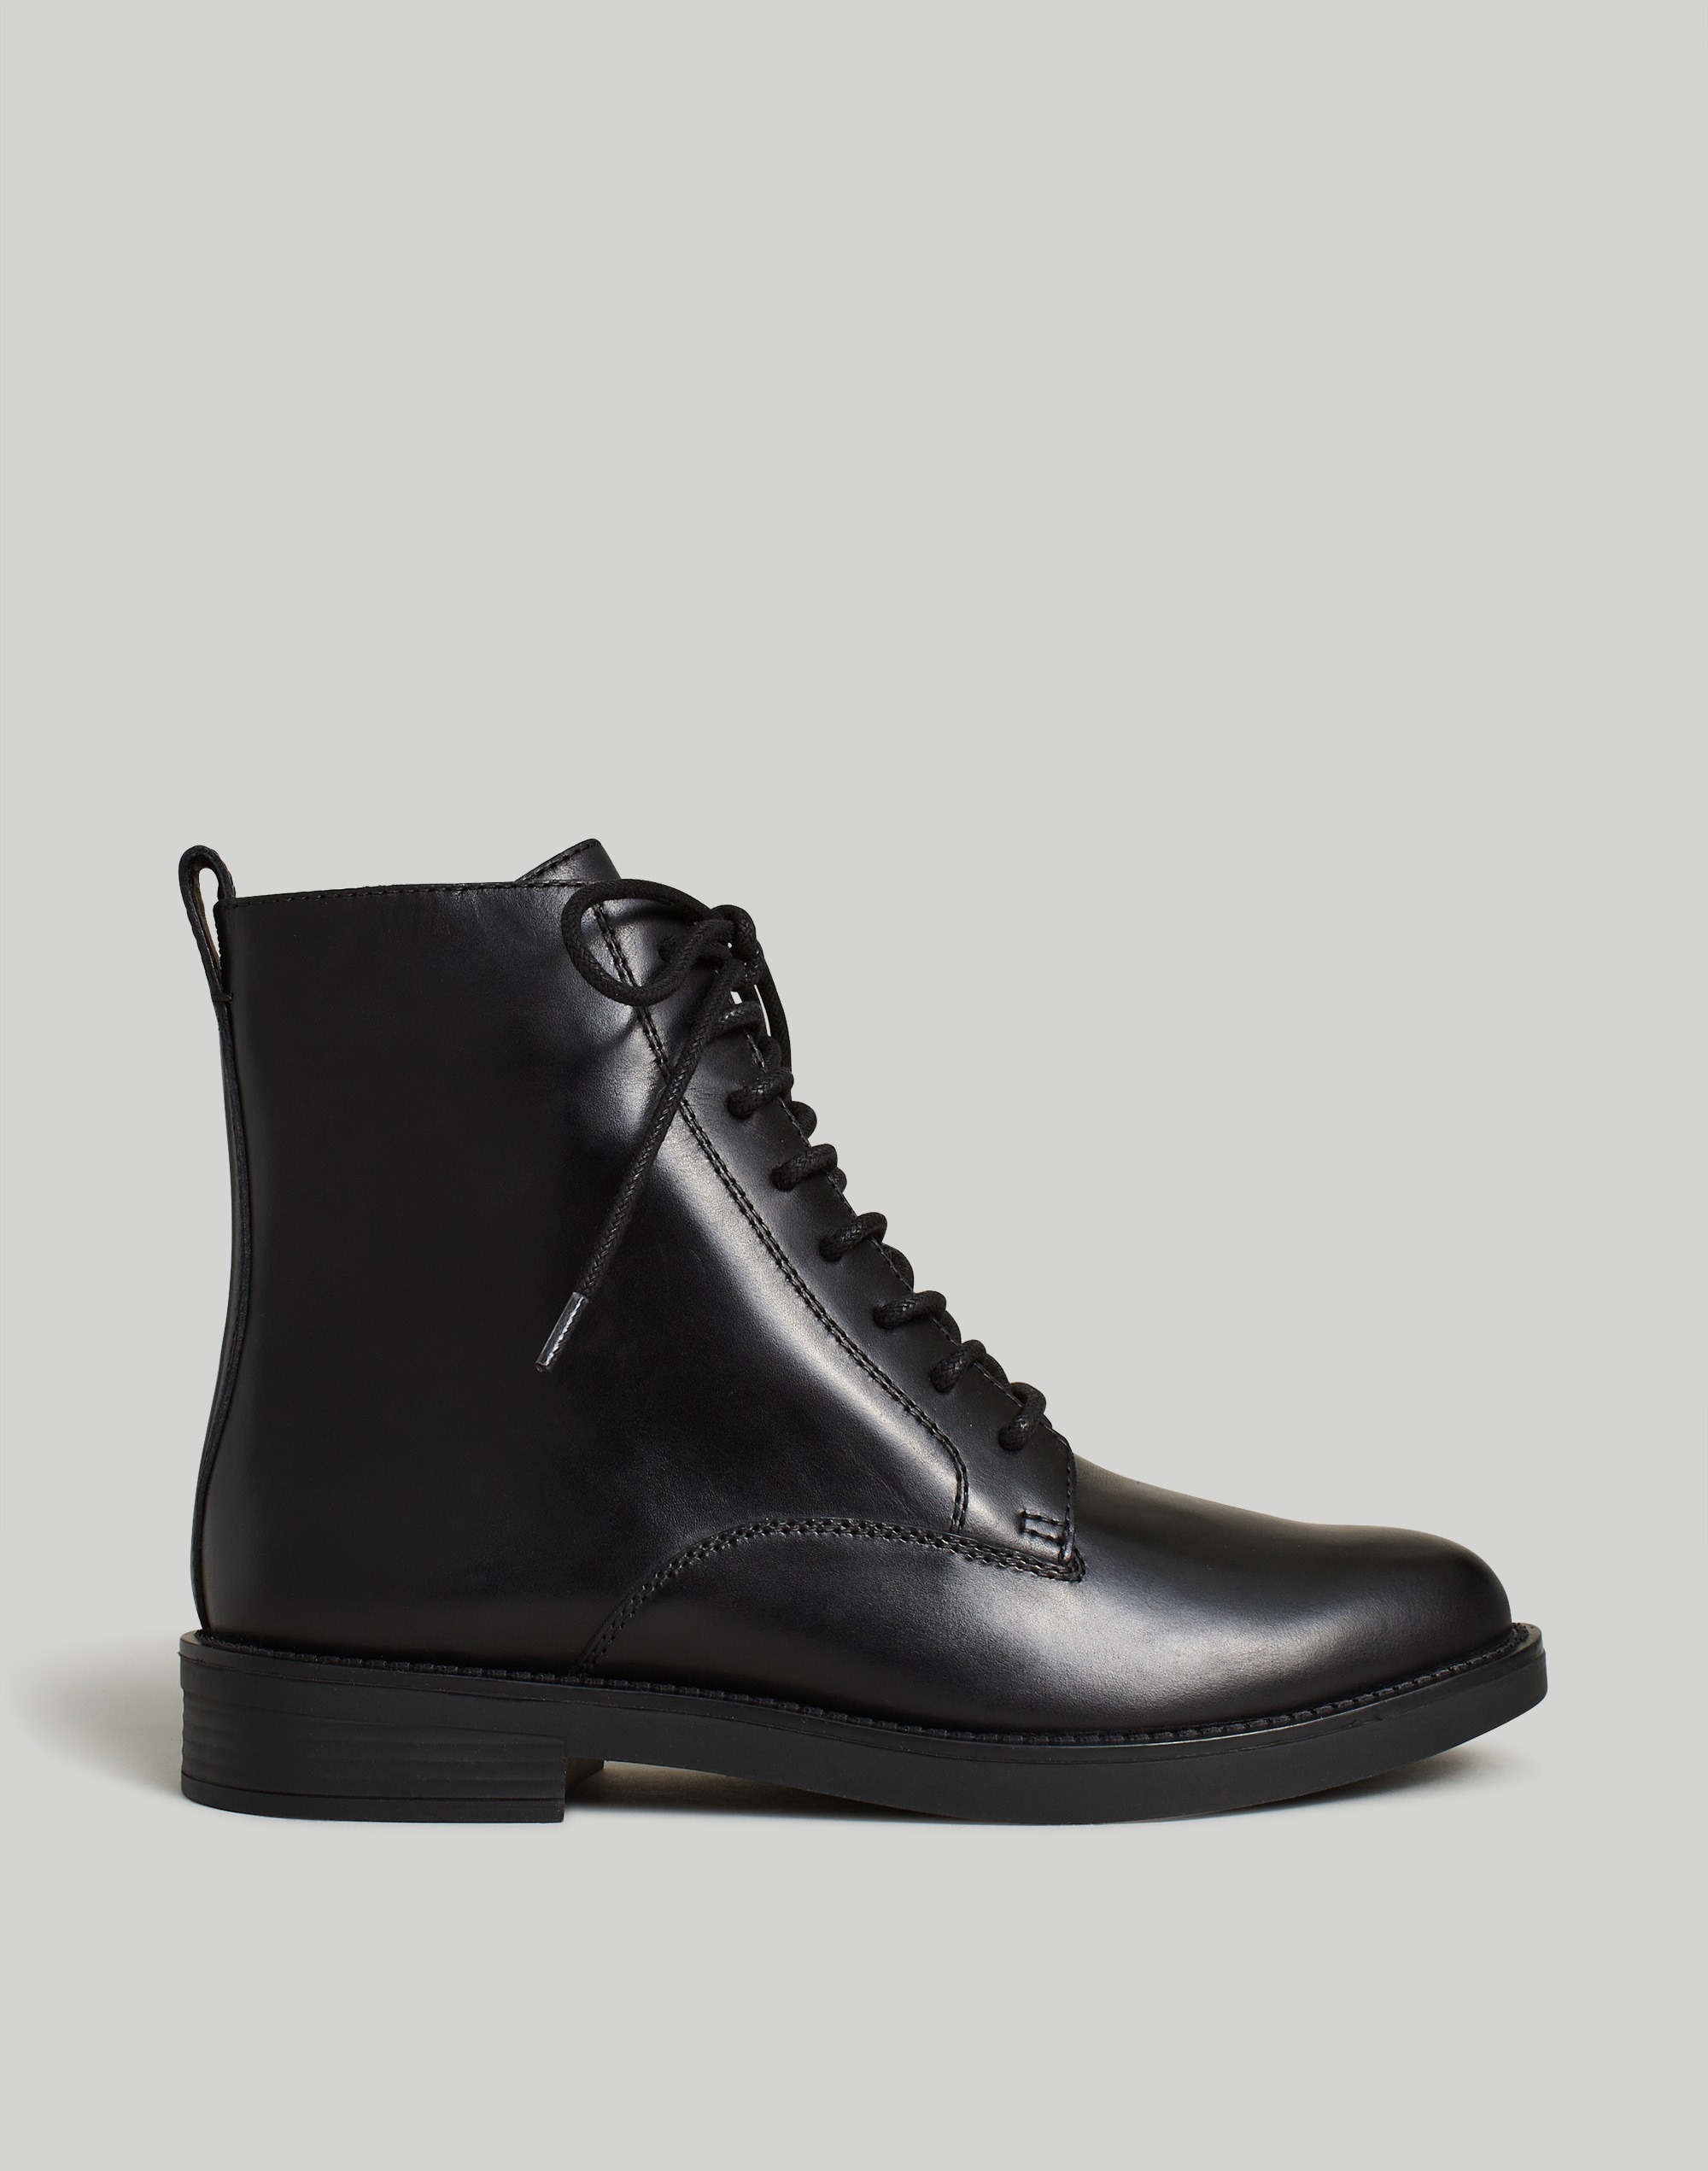 The Evelyn Lace-Up Ankle Boot